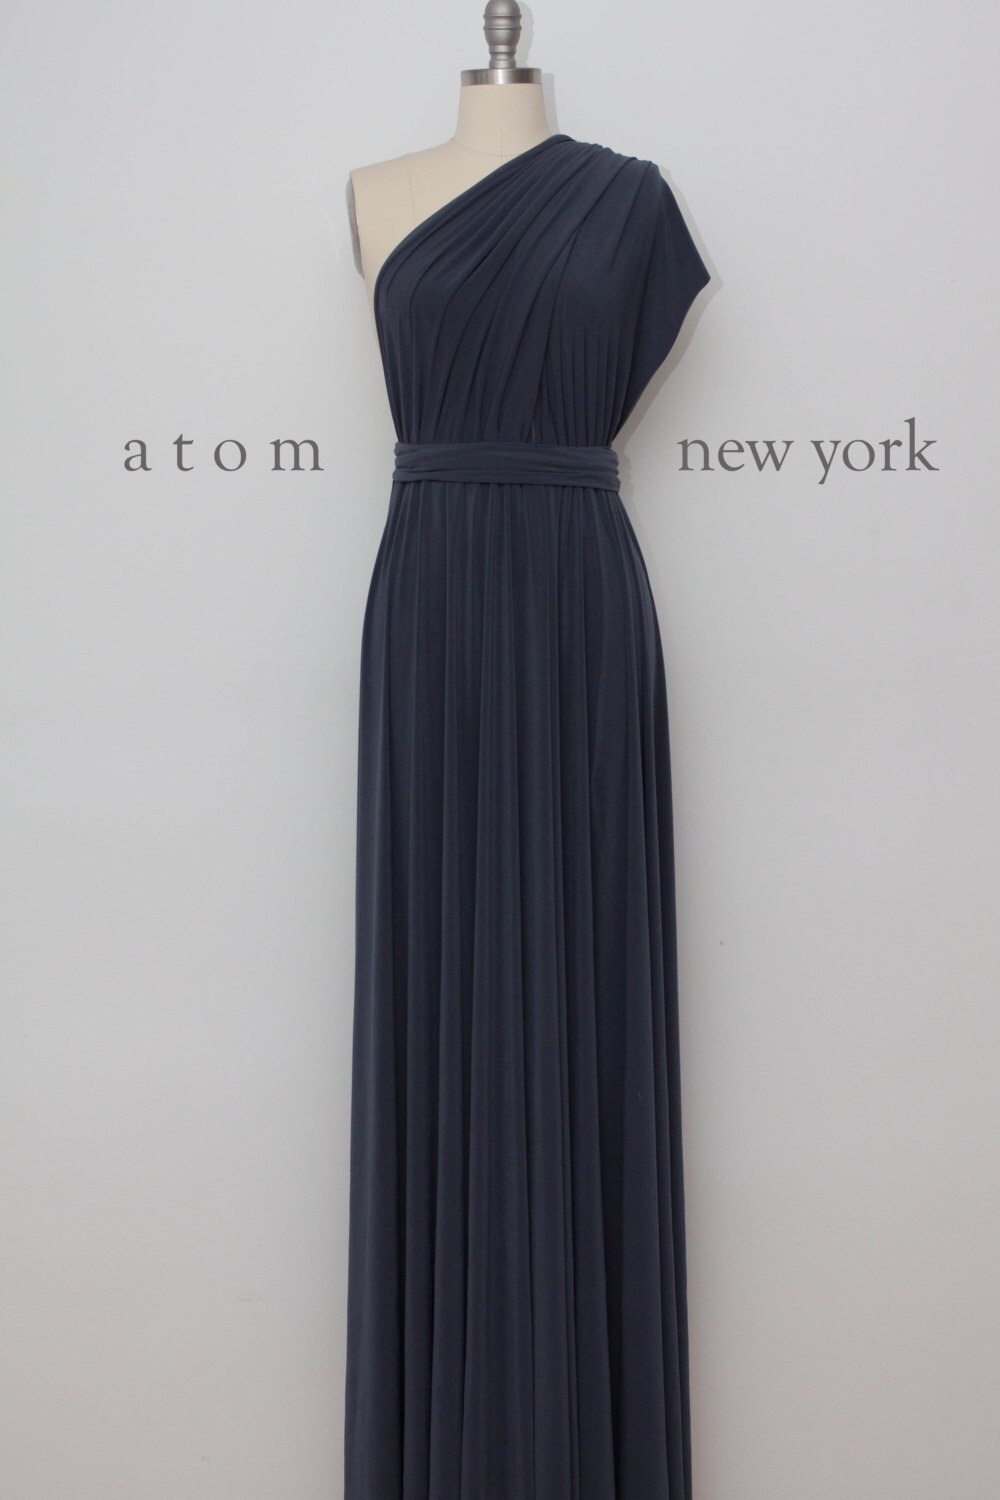 Charcoal Gray LONG Floor Length Ball Gown Maxi by AtomAttire